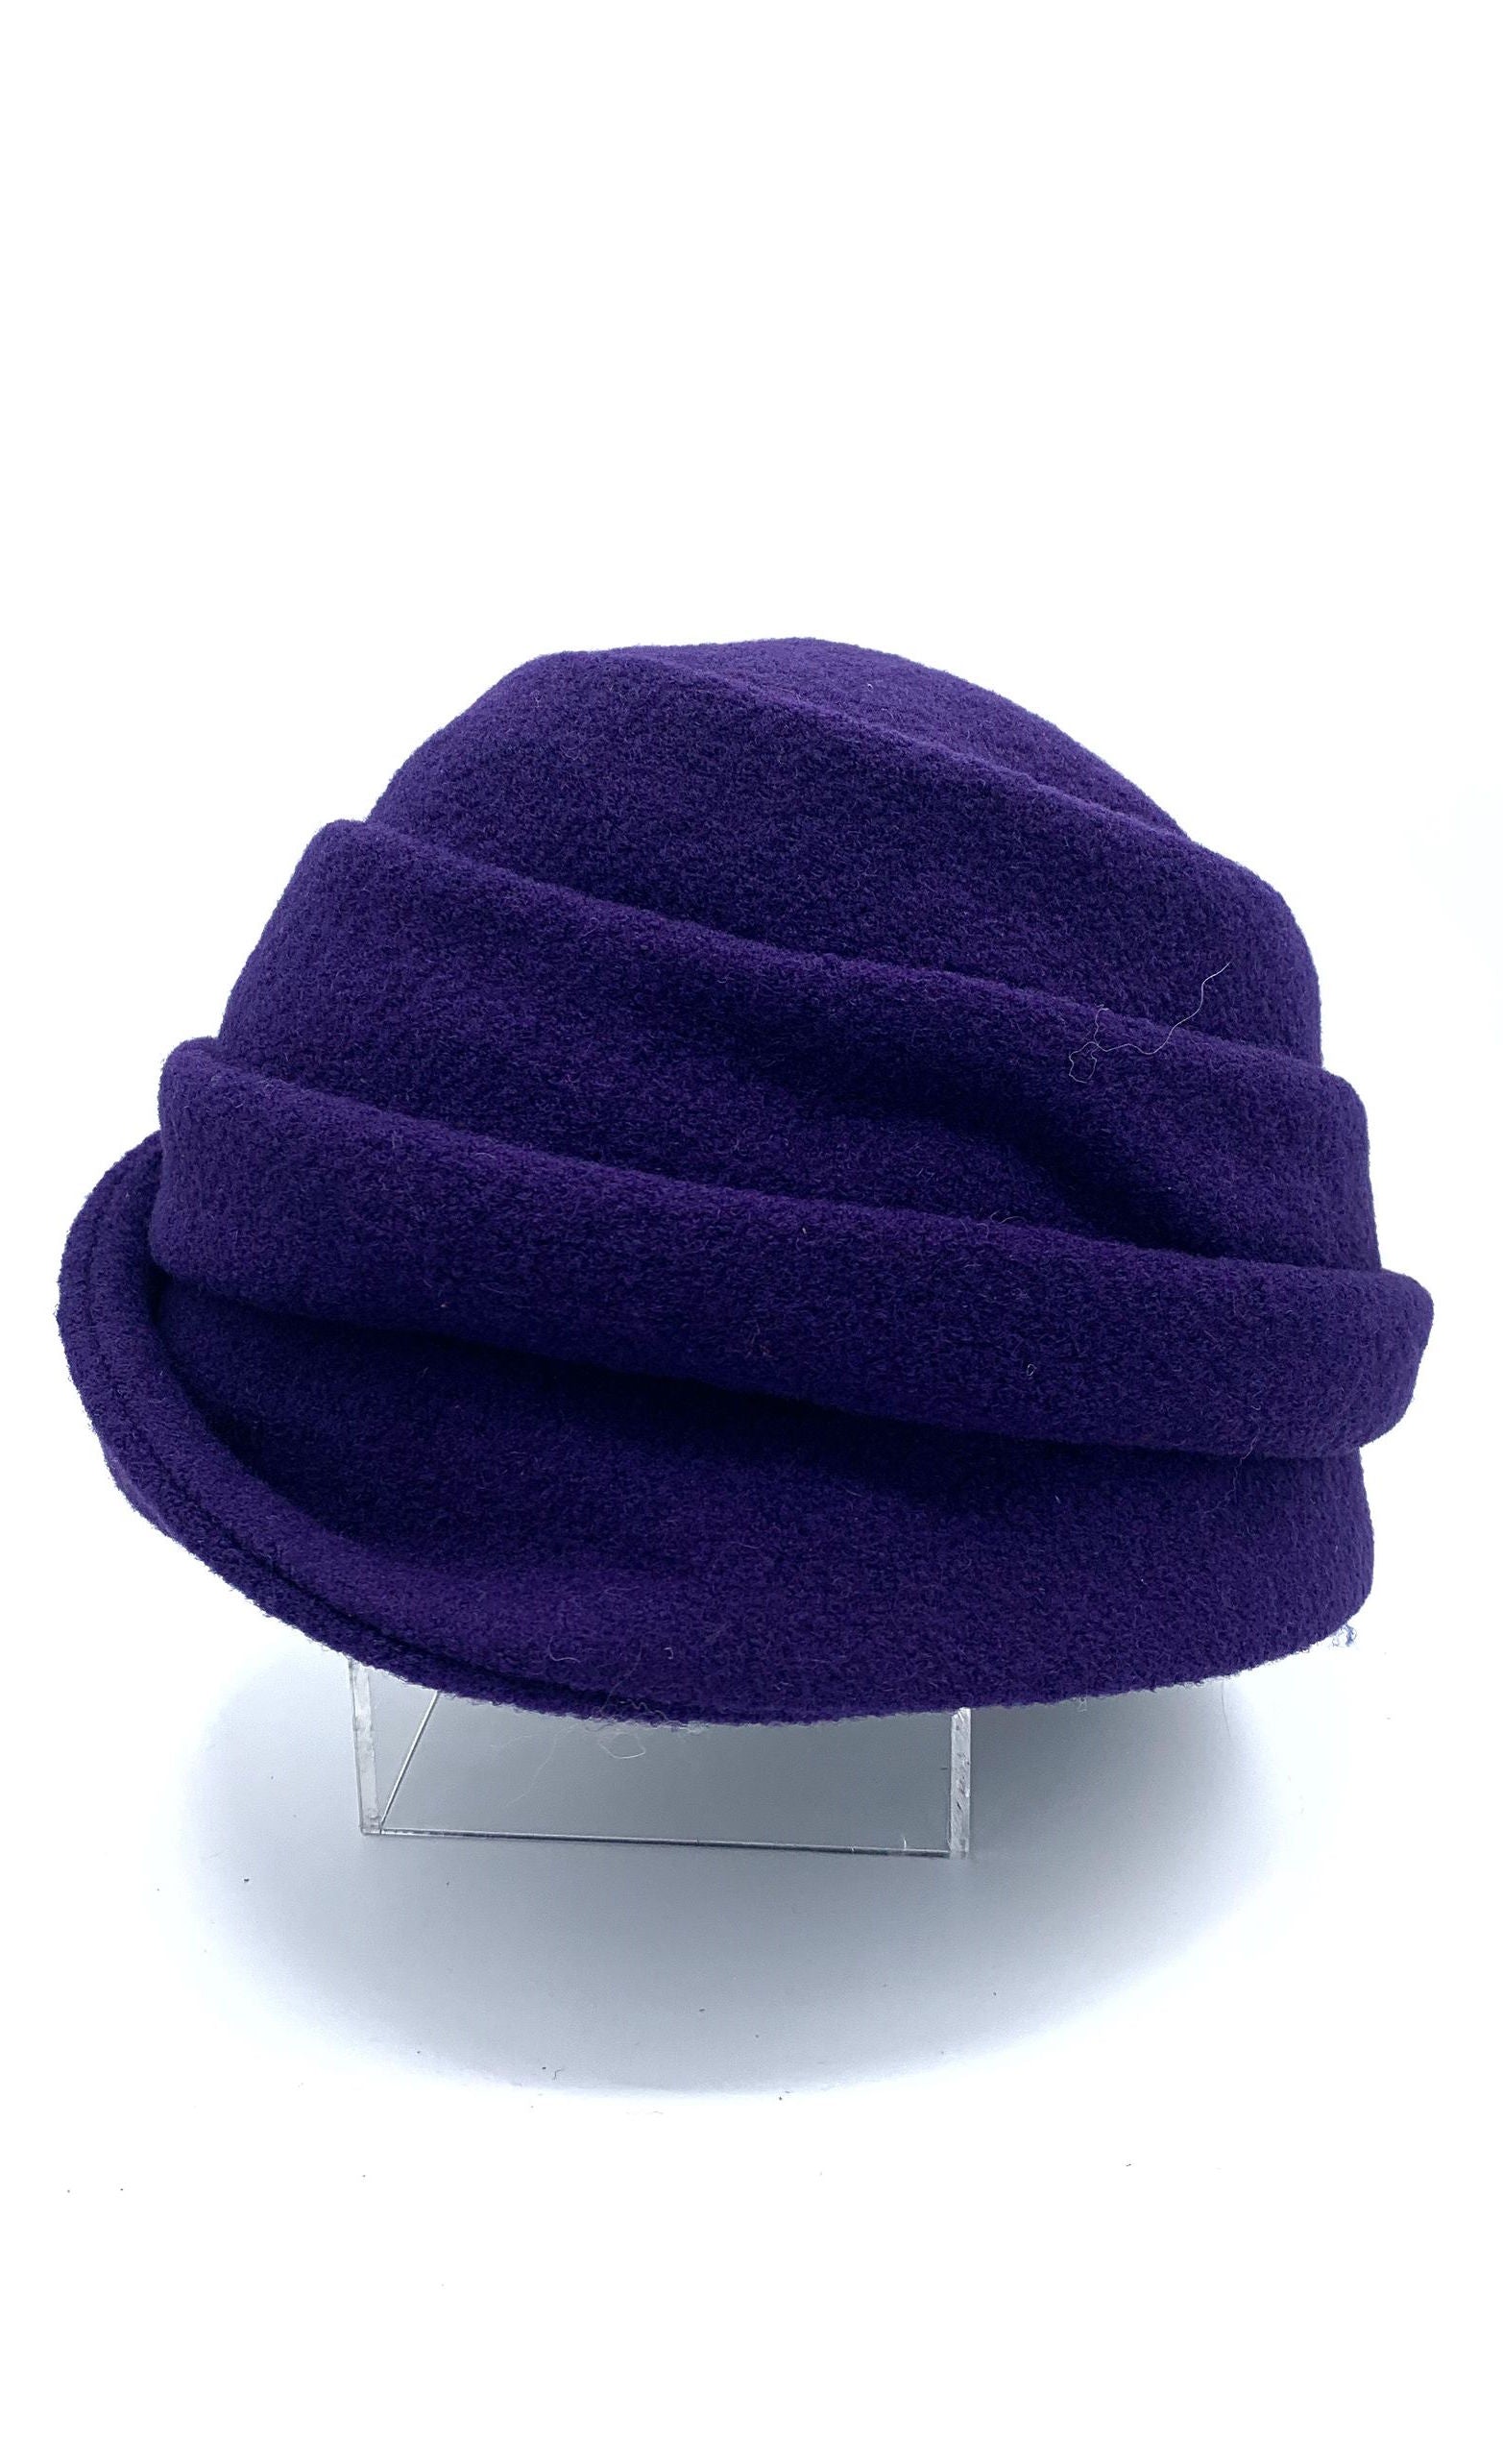 Left side view of the lillie & cohoe boiled wool lexi purple hat. This has a tiered look on the crown and a folded brim that stitches up on the right side